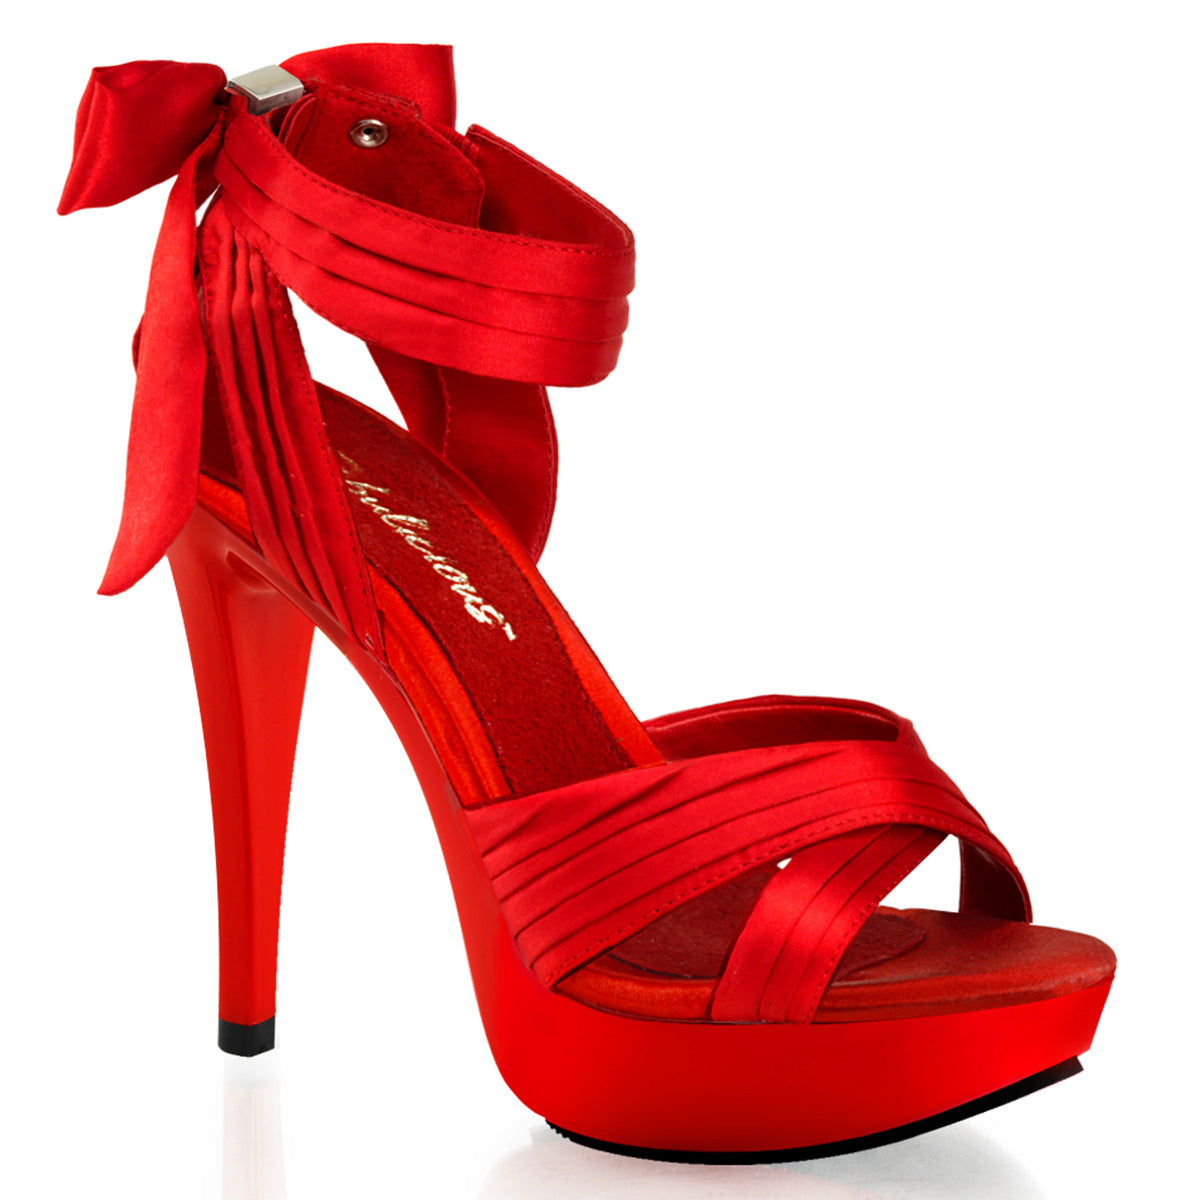 COCKTAIL-568 Fabulicious 5 Inch Heel Red Satin Sexy Shoes